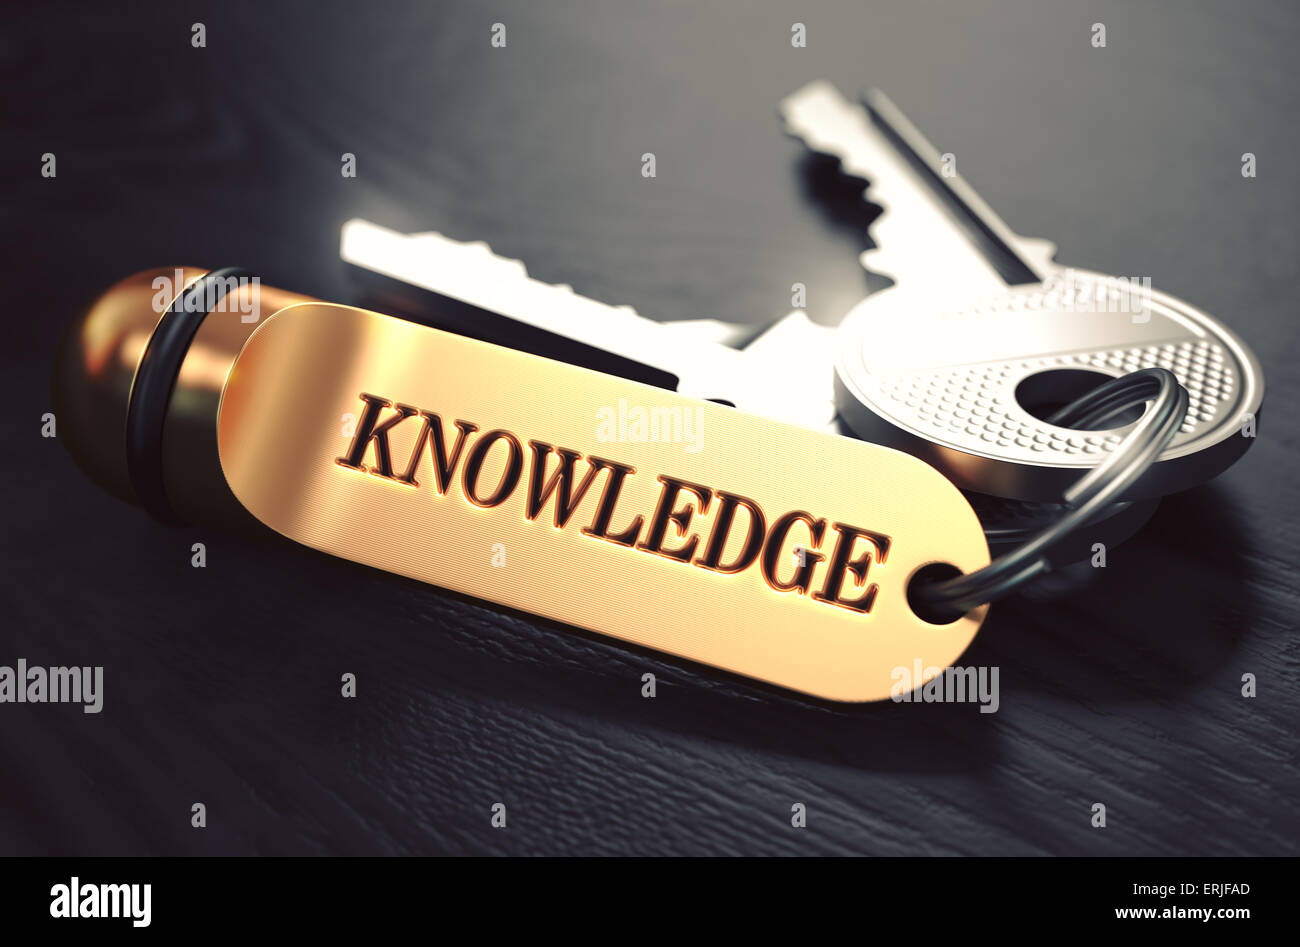 Keys to Knowledge. Concept on Golden Keychain. Stock Photo